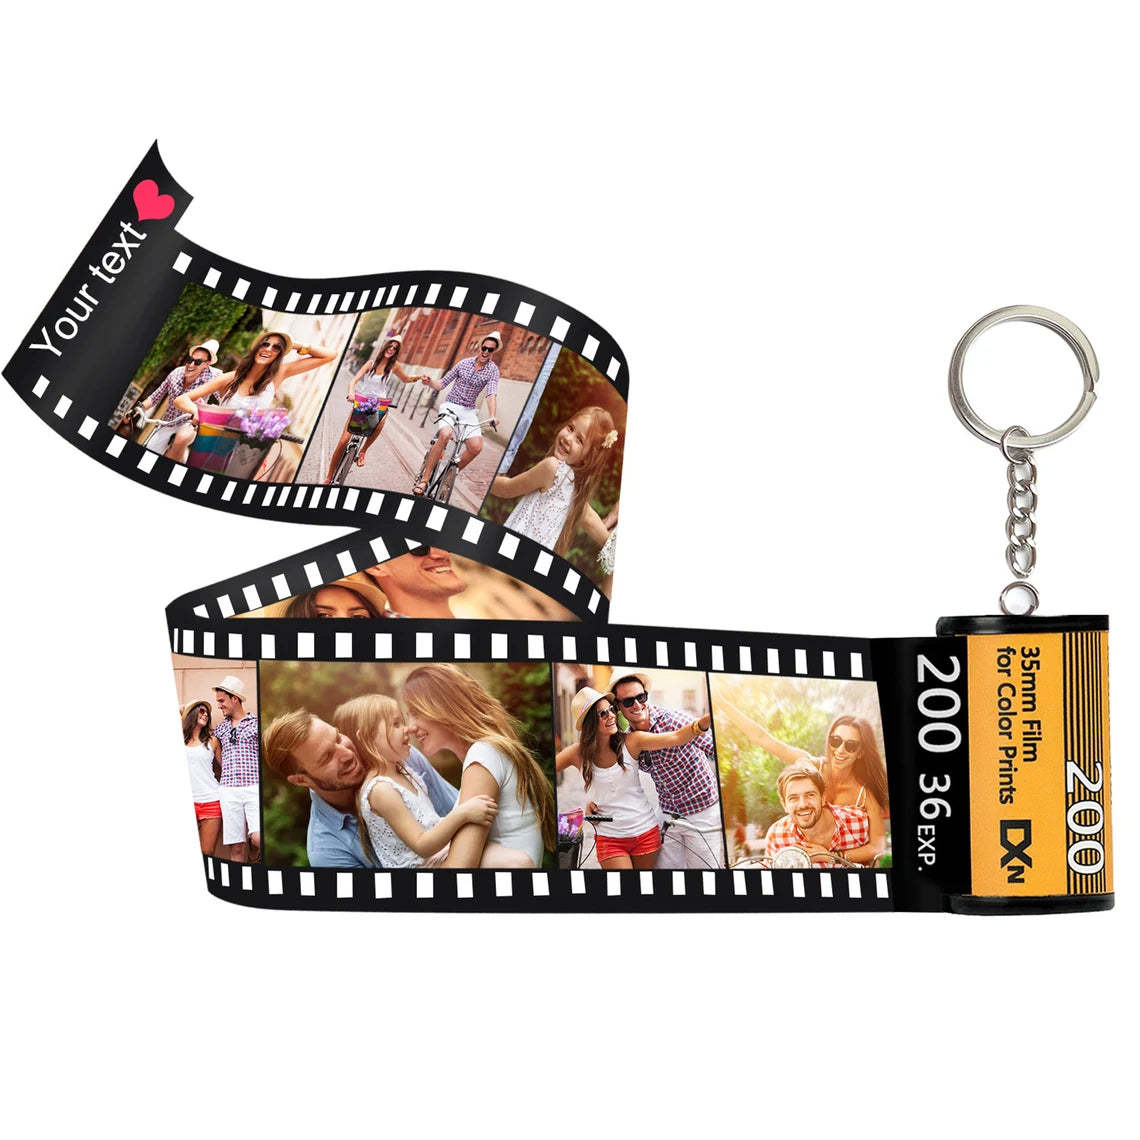 Custom Text For The Film Roll Keychain Personalized Picture Keychain with Reel Album Customized Gift for Christmas - soufeelmy